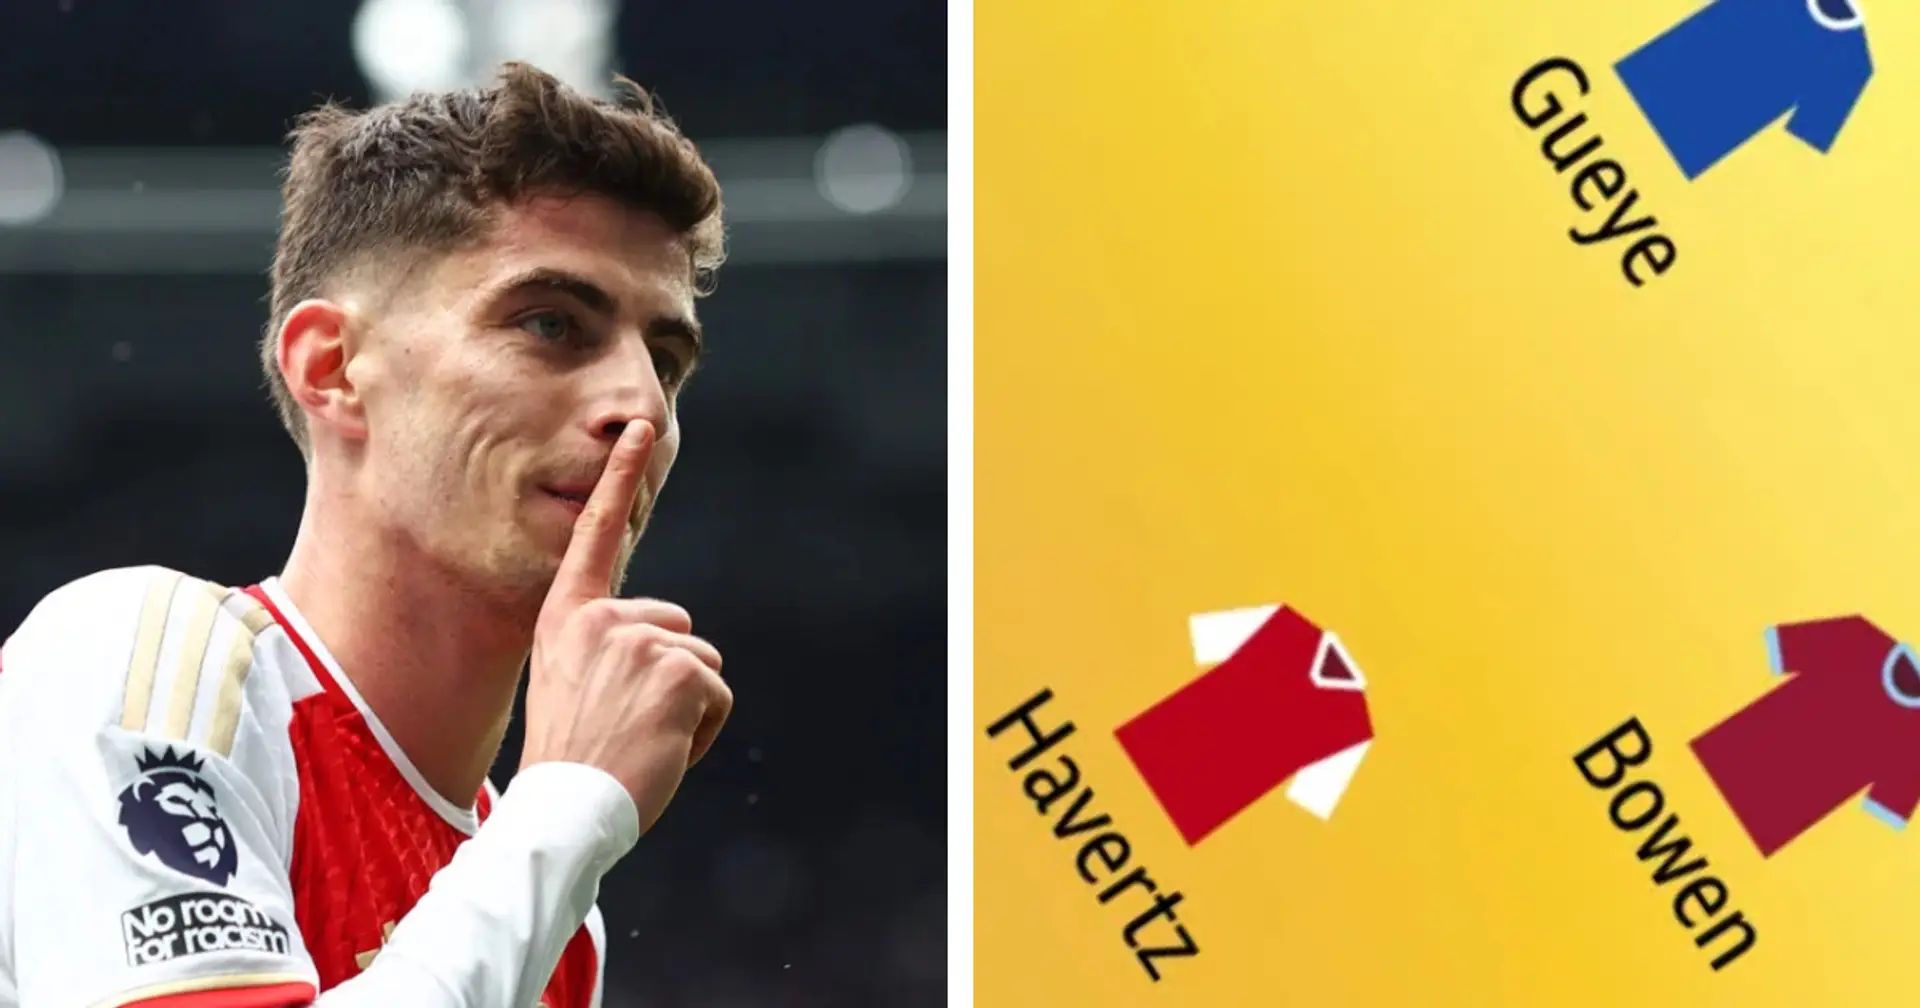 Kai Havertz & 2 more Arsenal stars make BBC's Team of the Week after crucial Spurs win